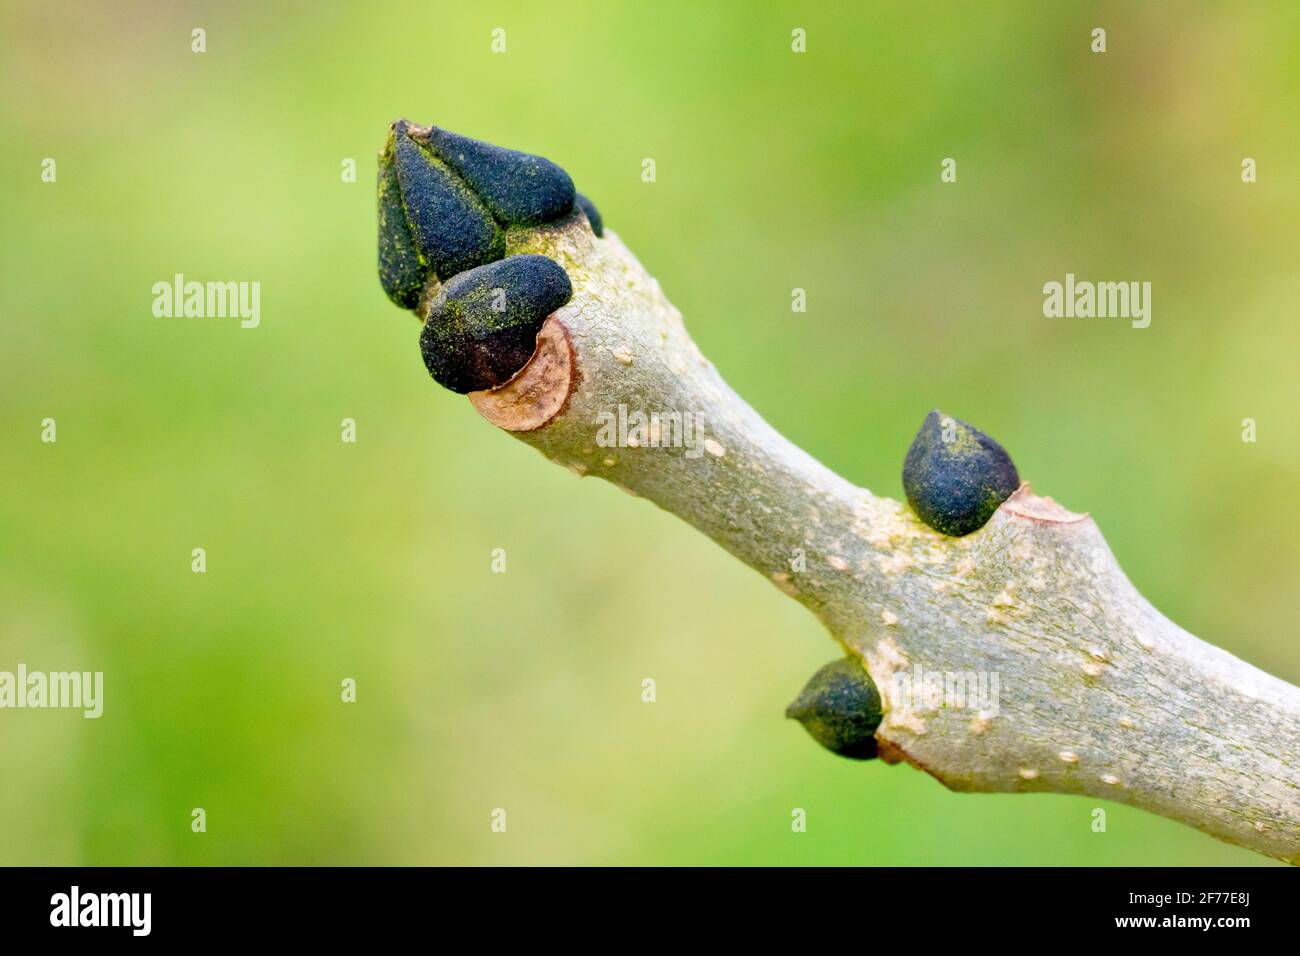 Ash leaf buds (fraxinus excelsior), close up showing the tip of a branch with the distinctive grey bark and black leaf buds of the tree. Stock Photo